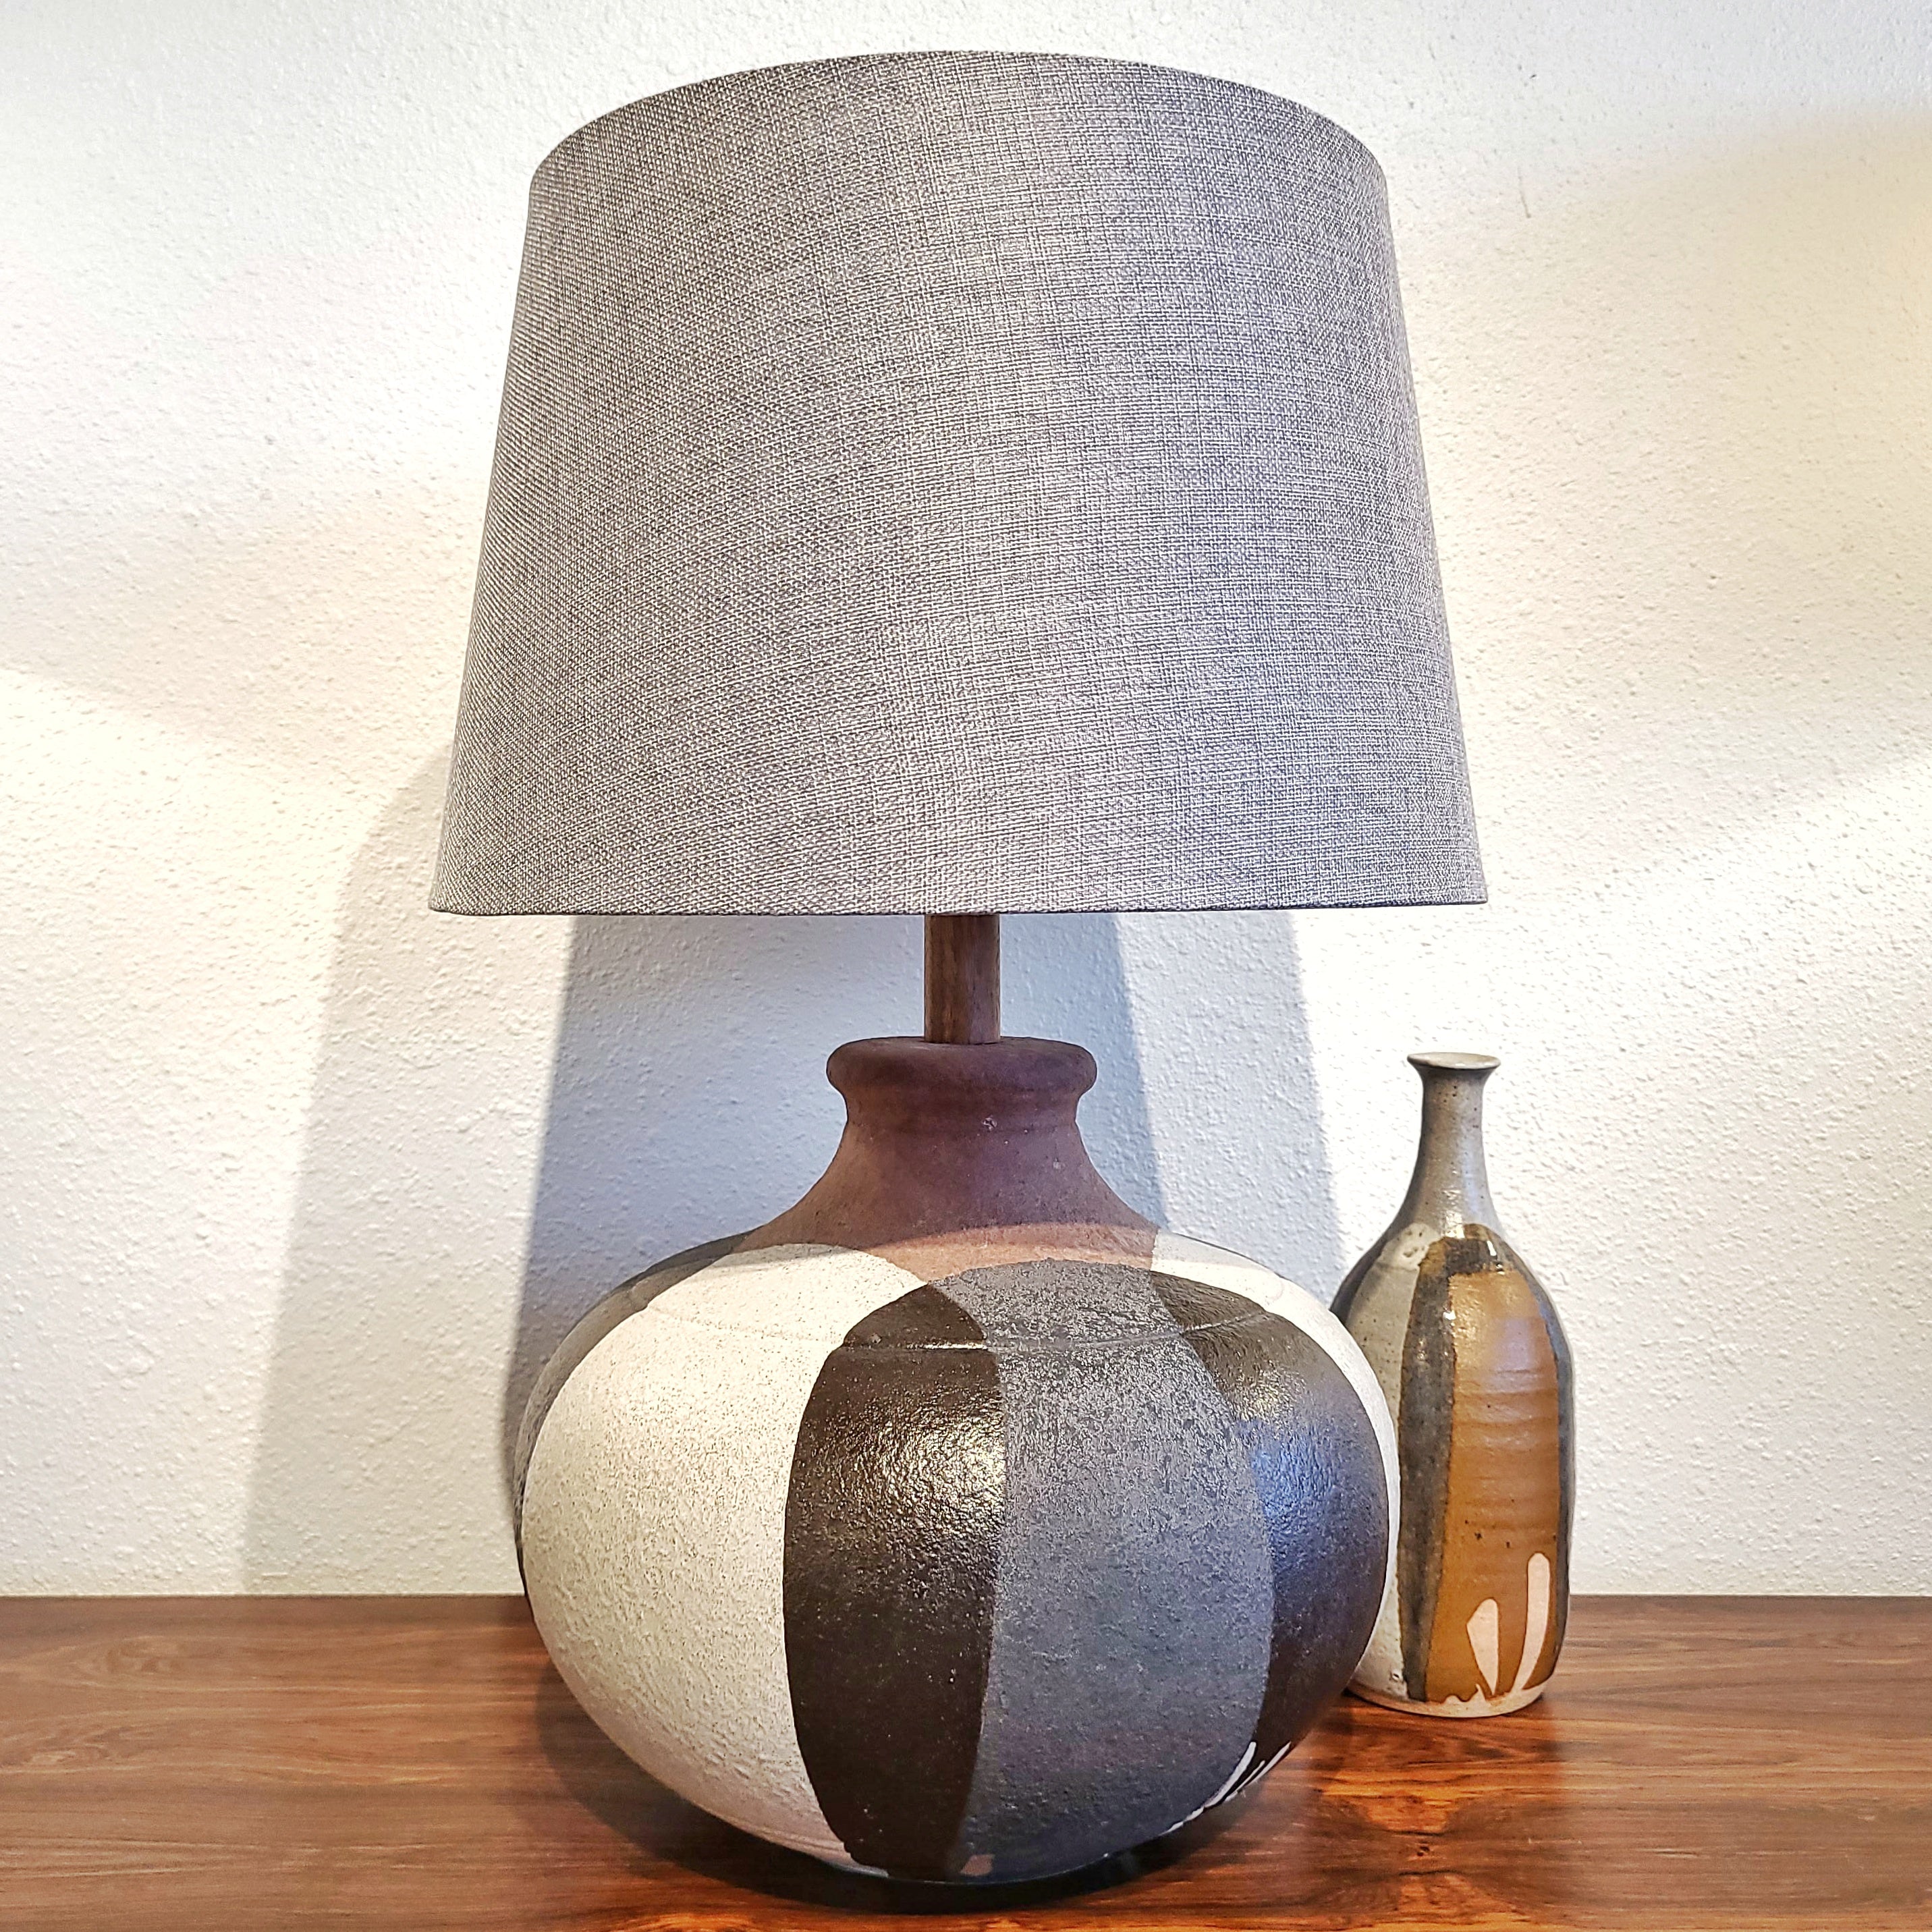 DAVID CRESSEY 'PRO/ARTISAN' COLLECTION TABLE LAMP FOR ARCHITECTURAL POTTERY